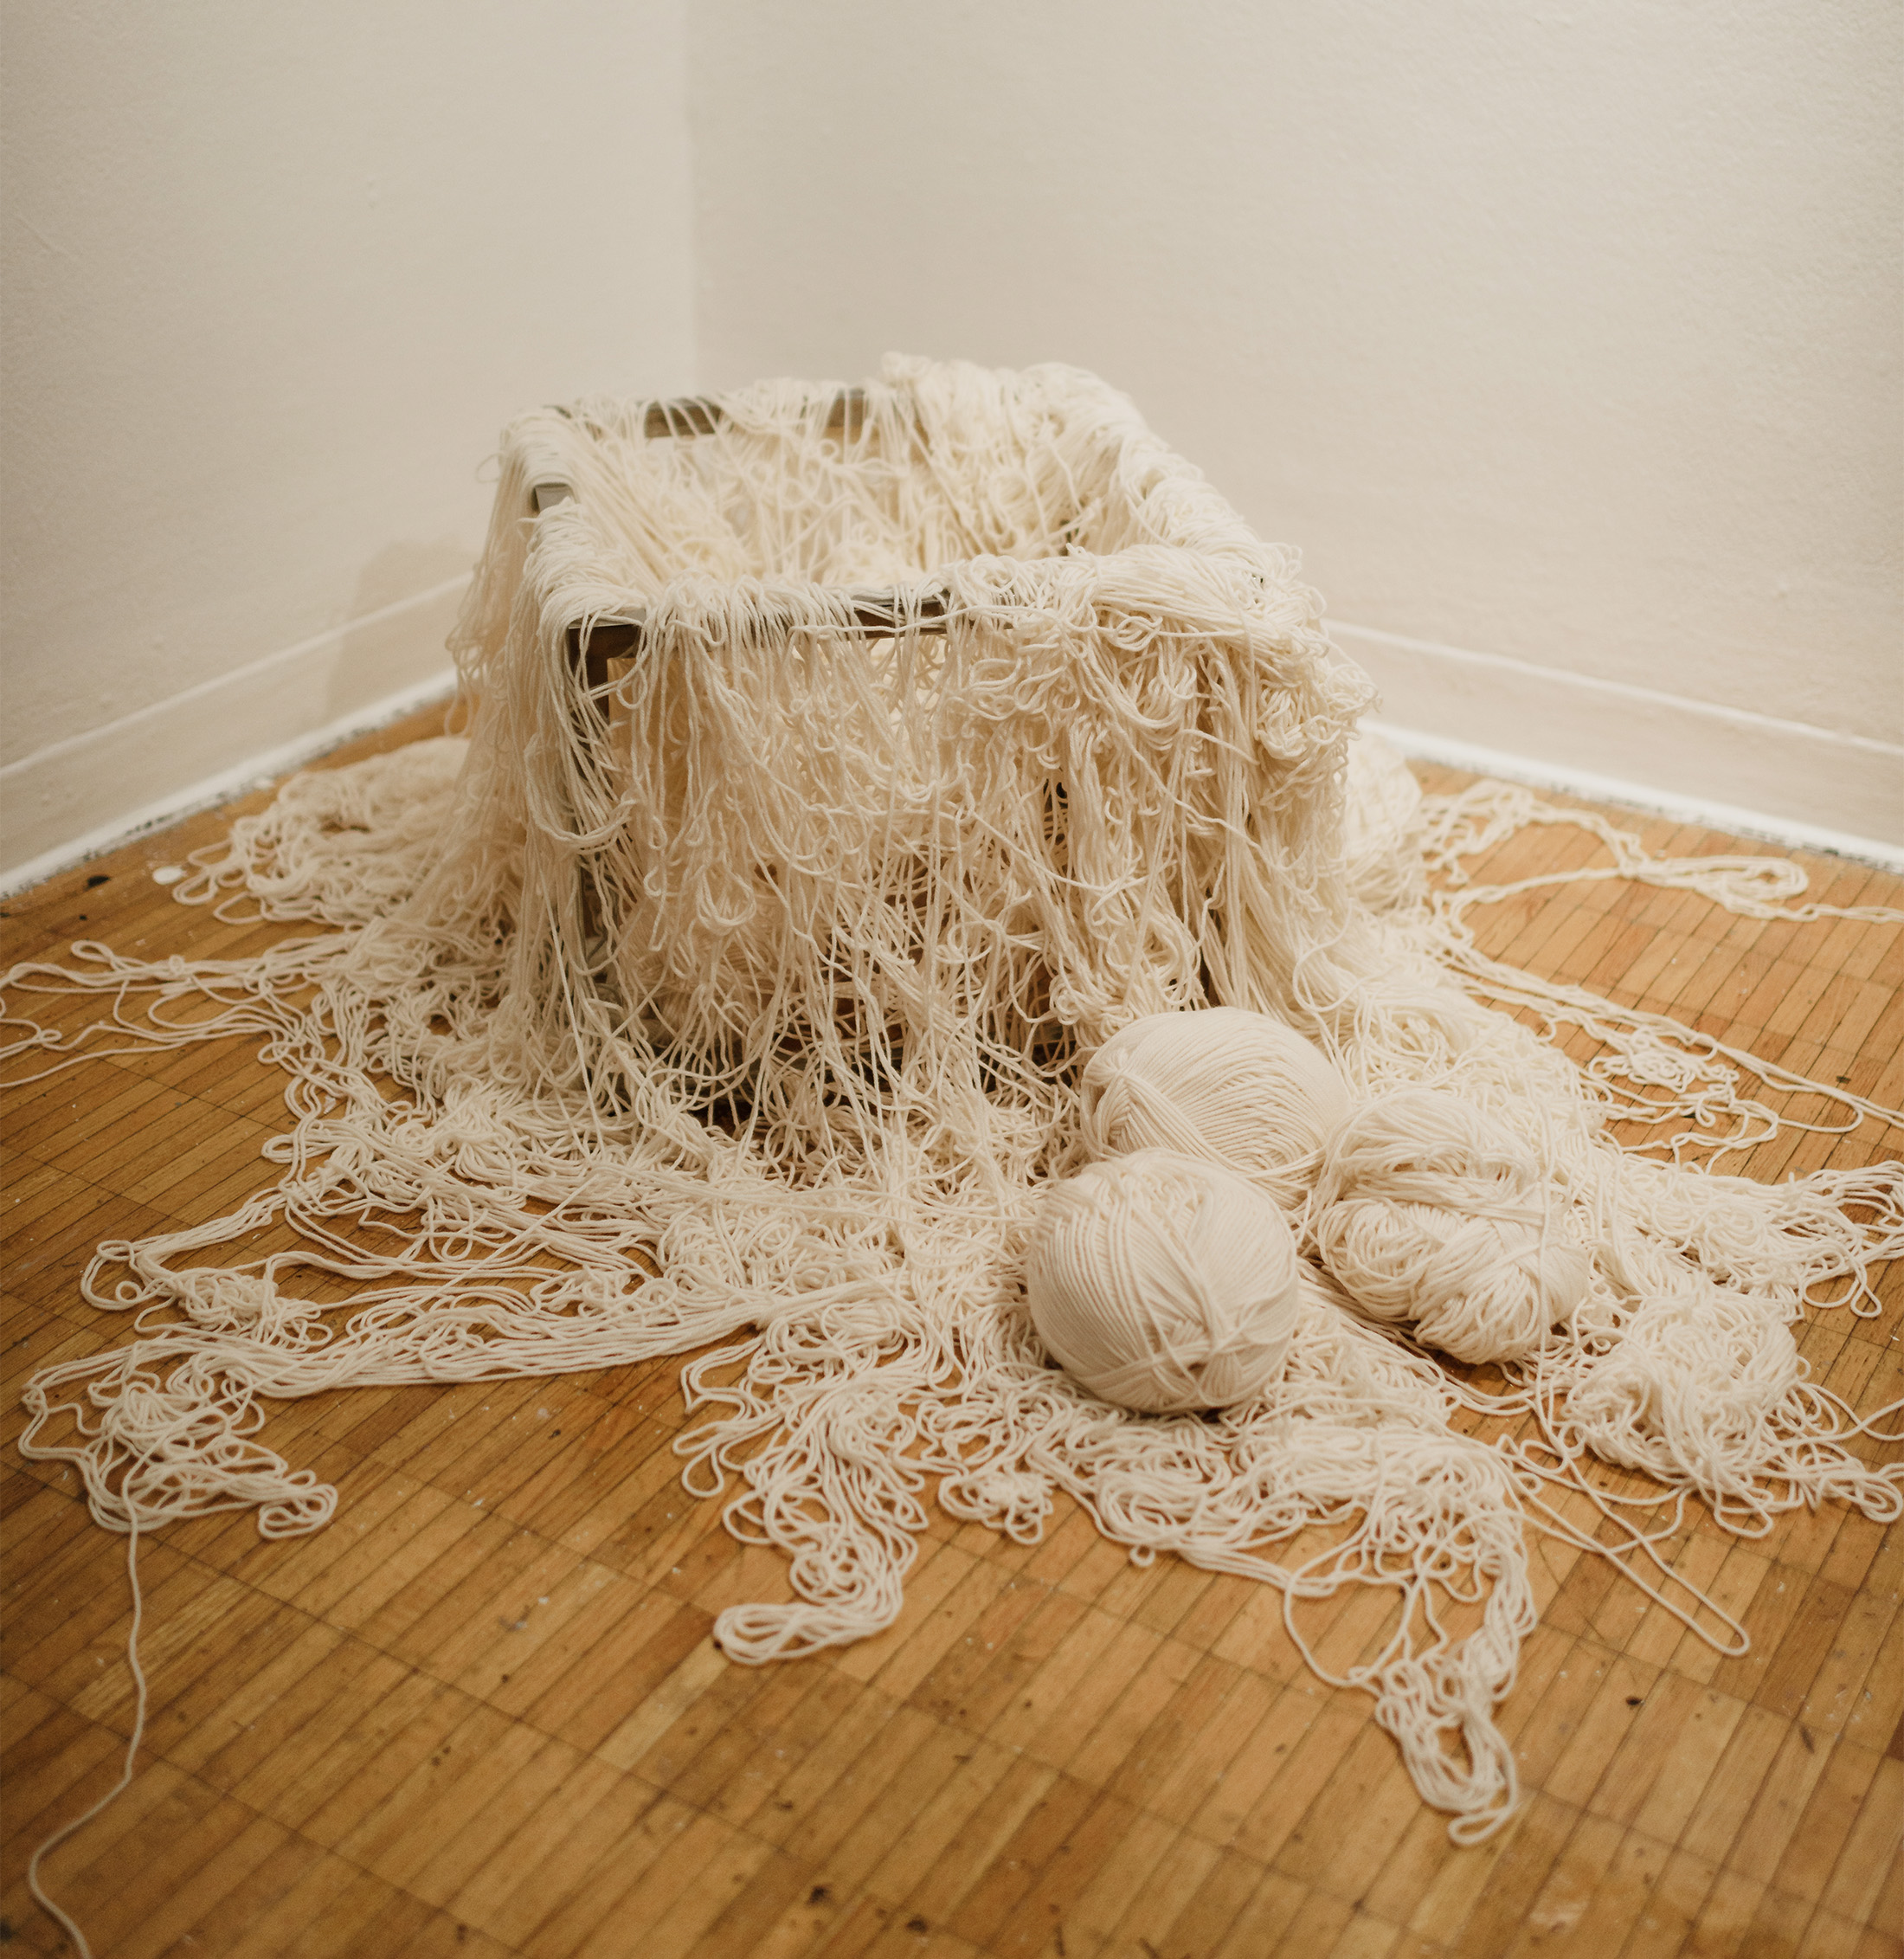 ball of tangled yarn used in video